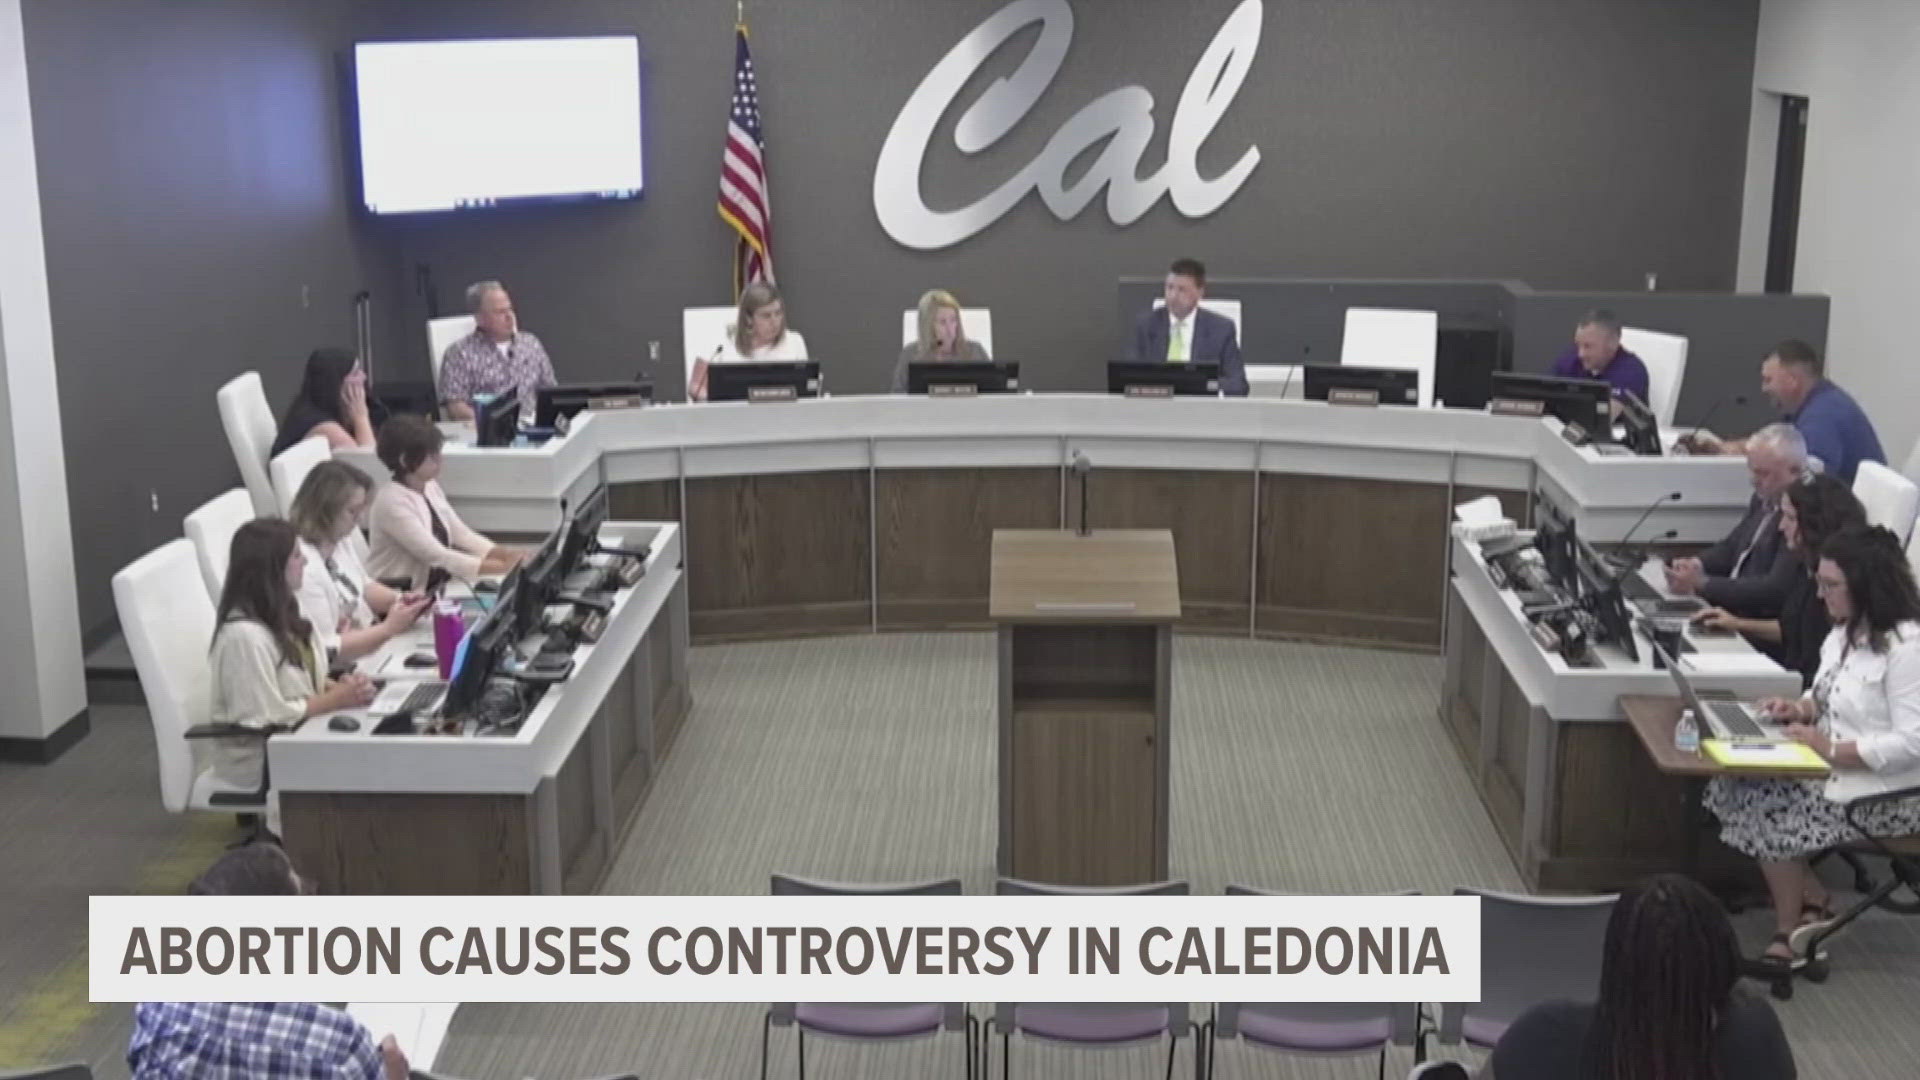 The Caledonia School Board has been debating a policy preventing school staff from discussing abortion.